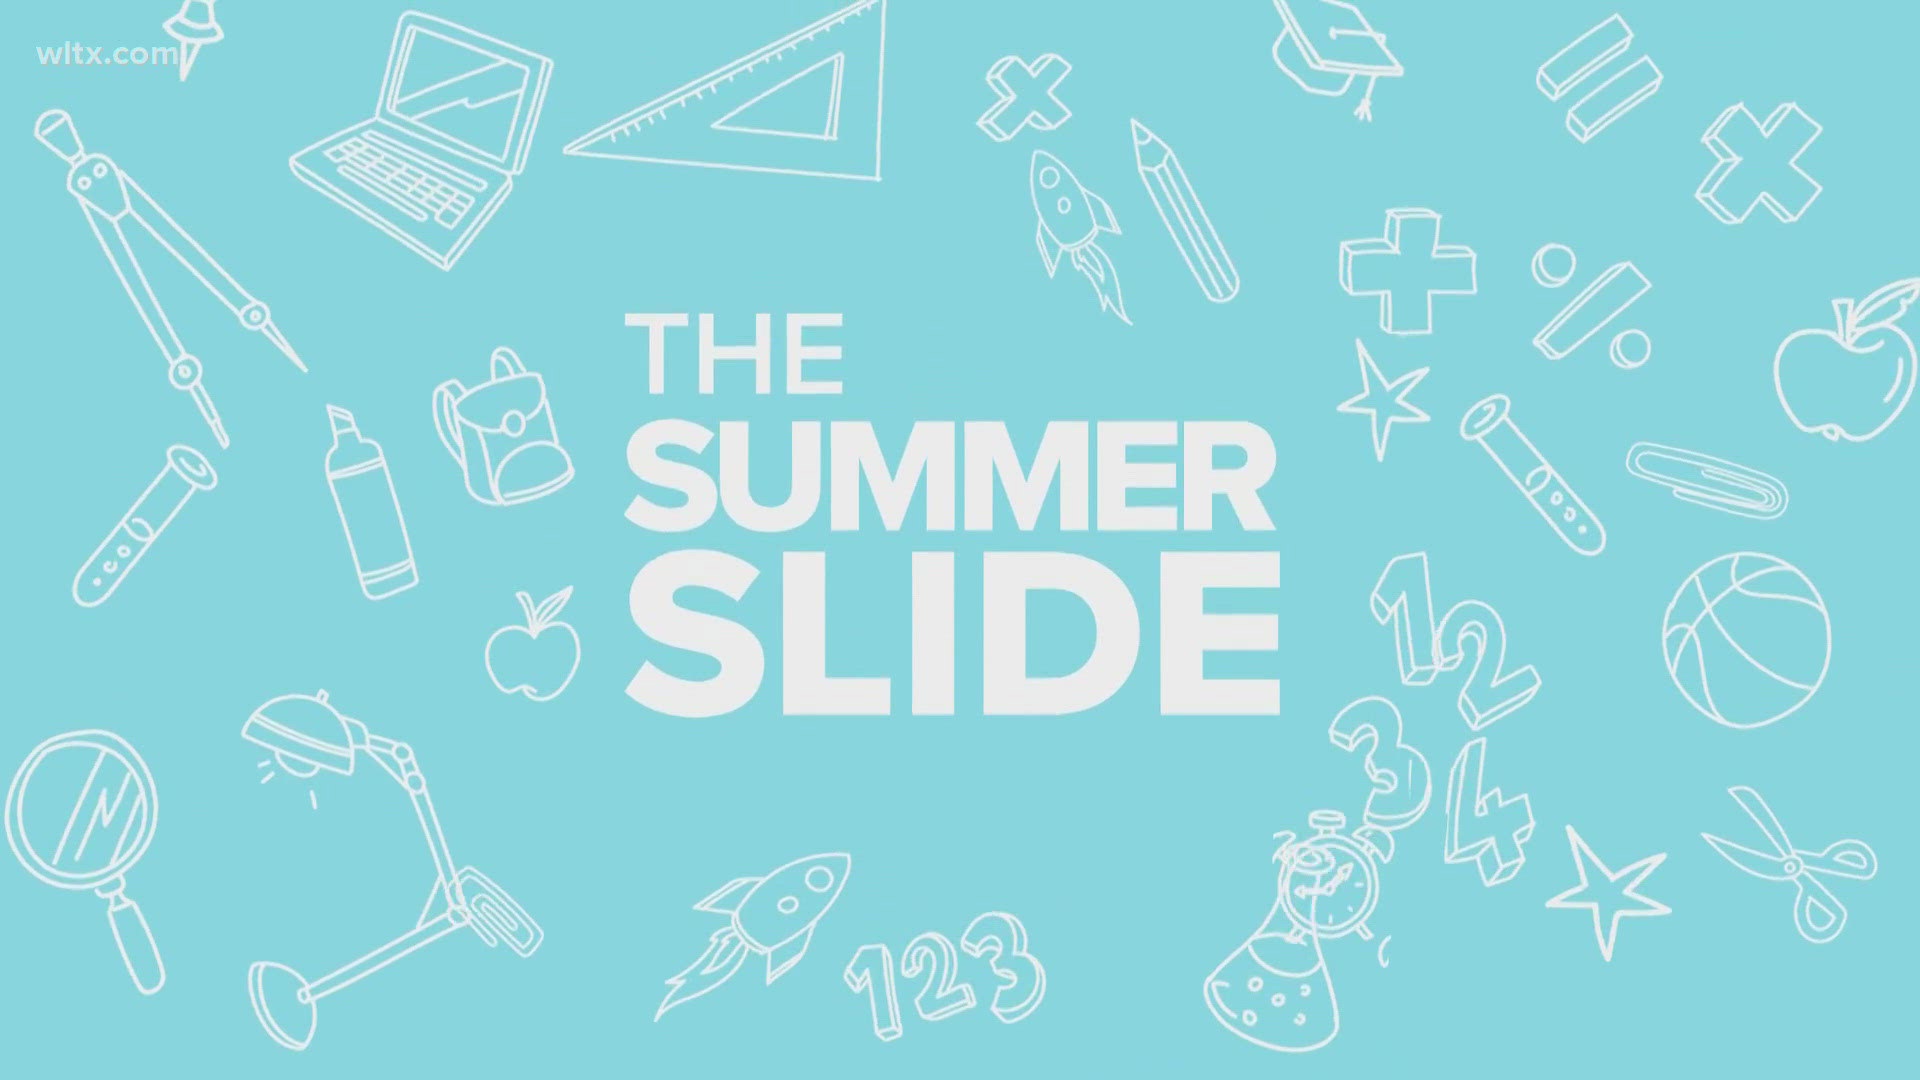 As students enjoy their summer vacation, some caregivers are concerned about the “Summer Slide”.